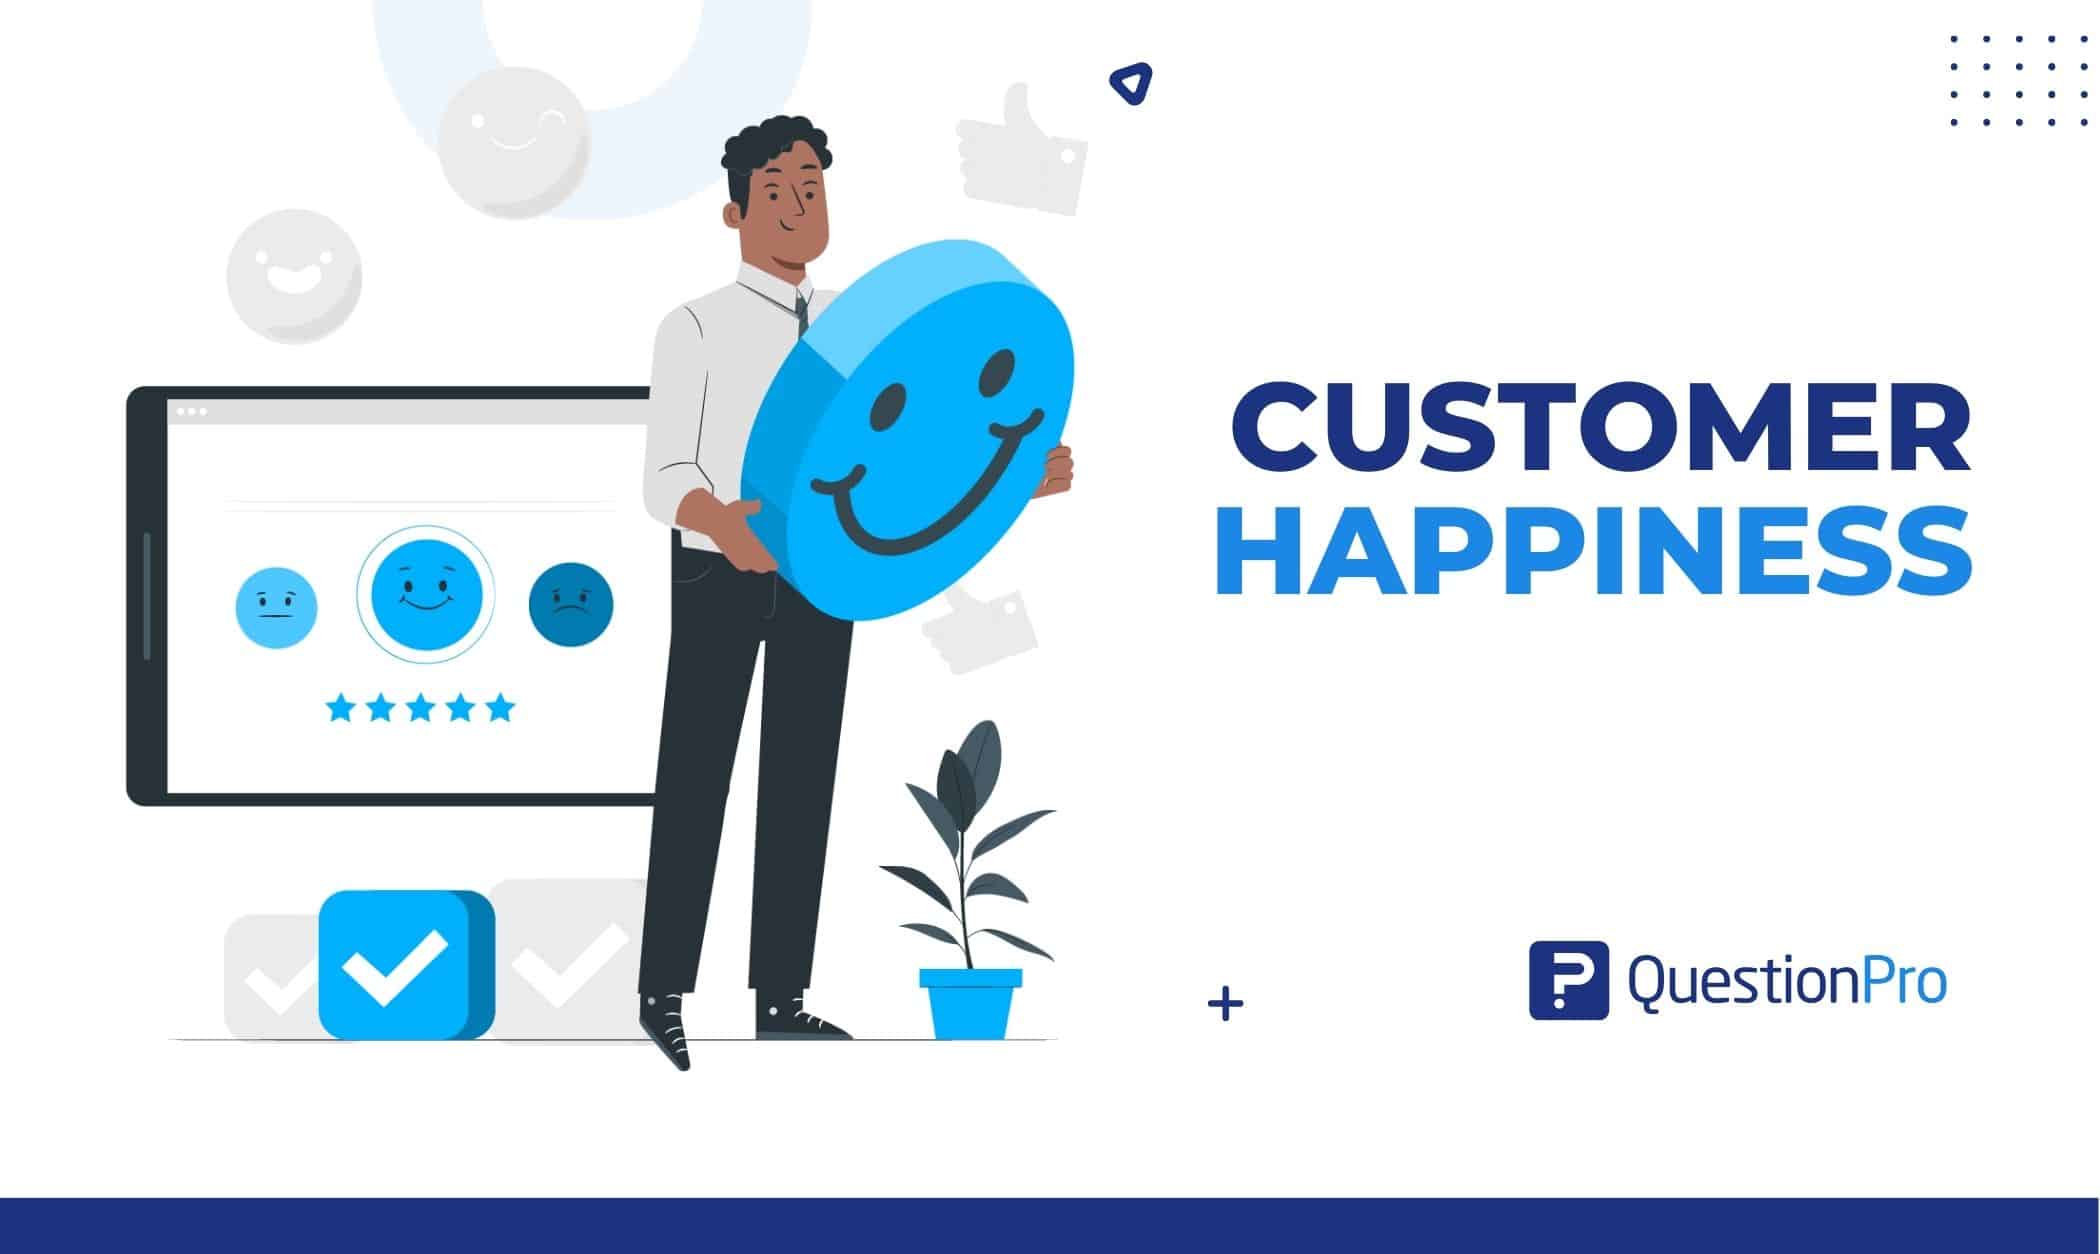 It's important to keep and measure customer happiness to know their satisfaction level. This blog will discuss it and how to do it right.